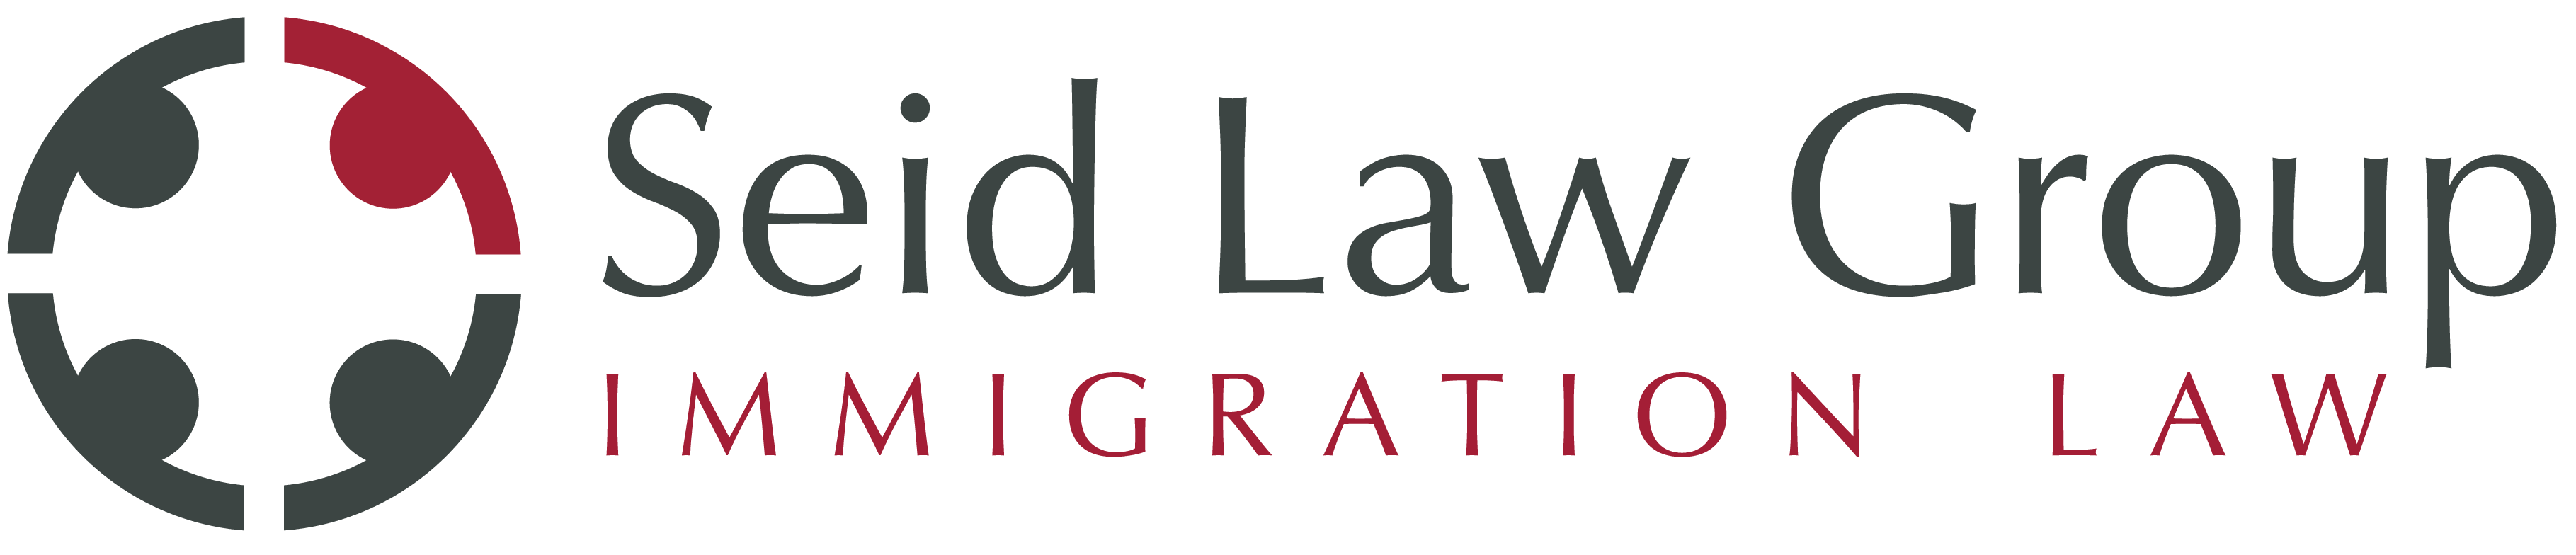 Logo for the Seid Law Group Immigration Law